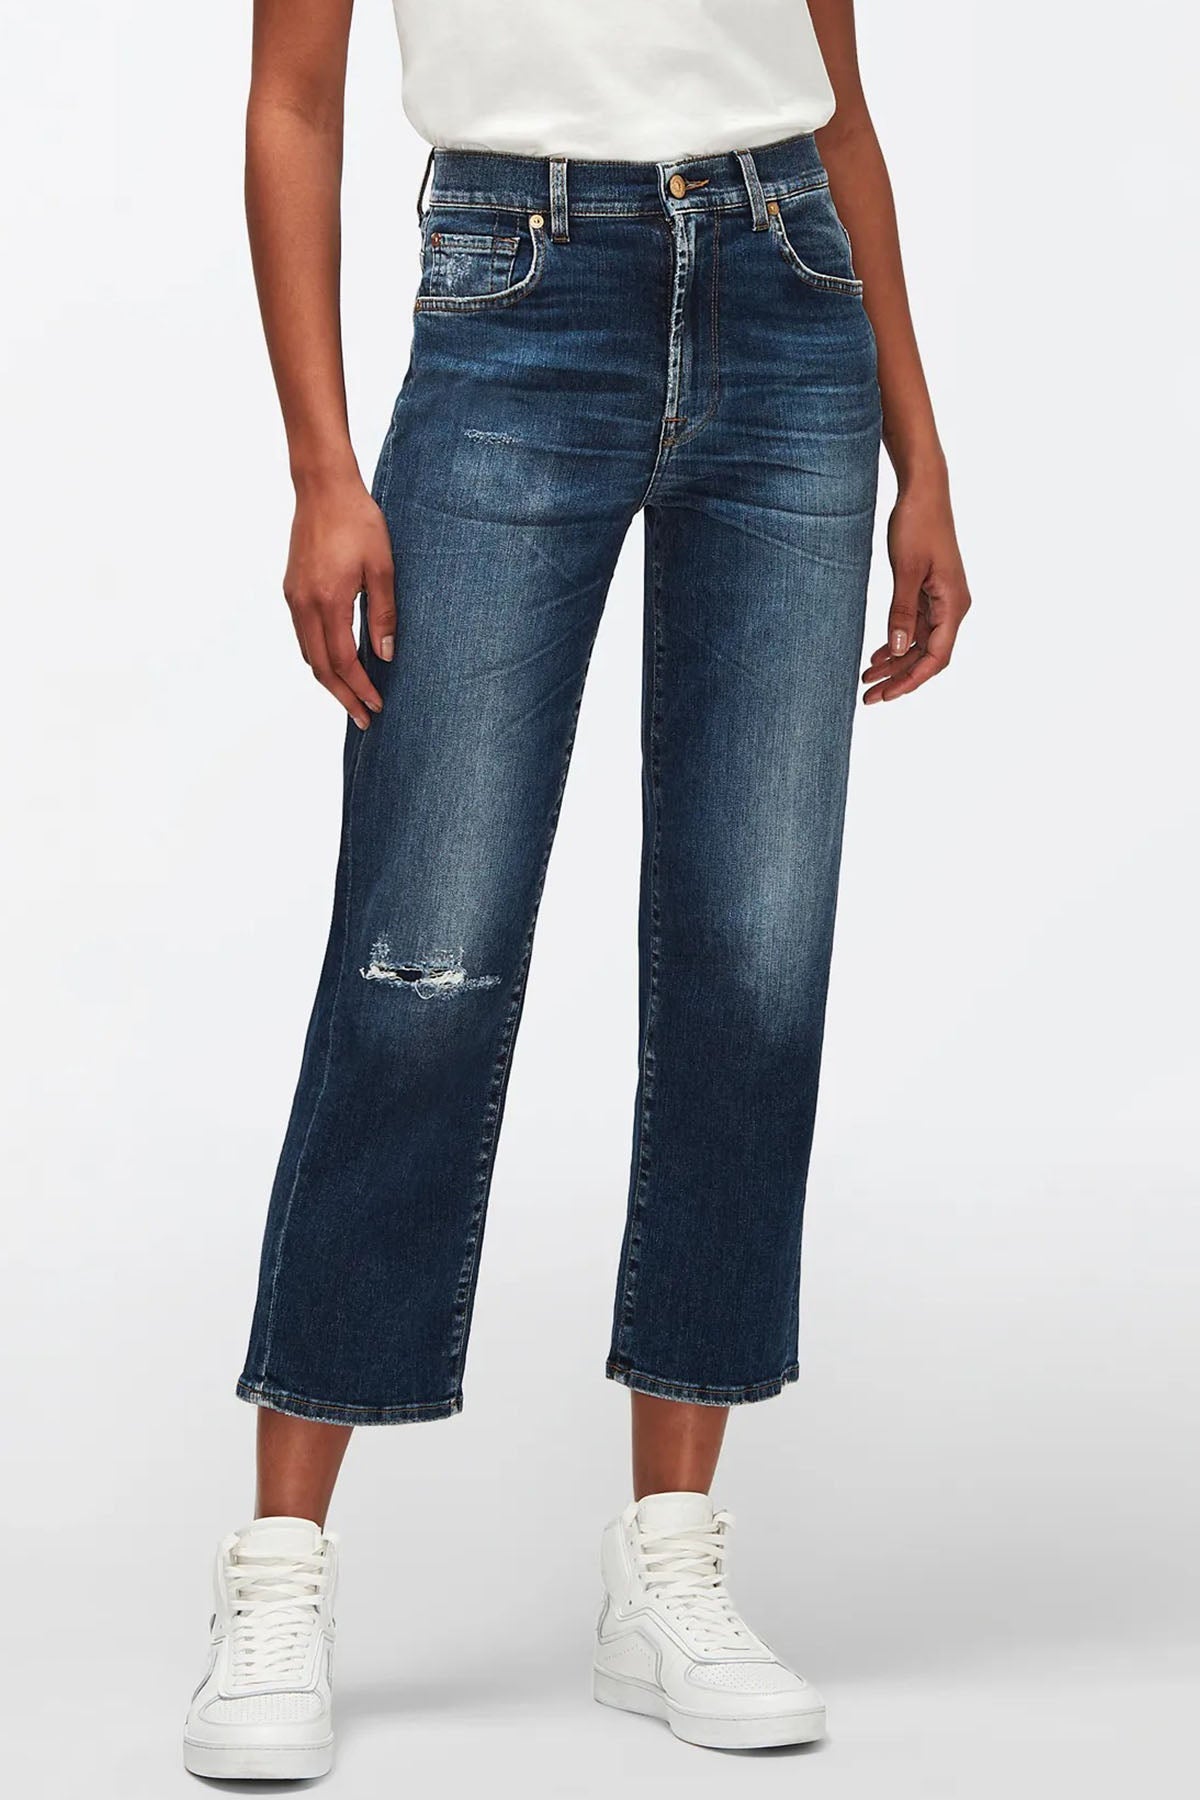 7 For All Mankind Modern Straight Fit Crop Paça Jeans-Libas Trendy Fashion Store